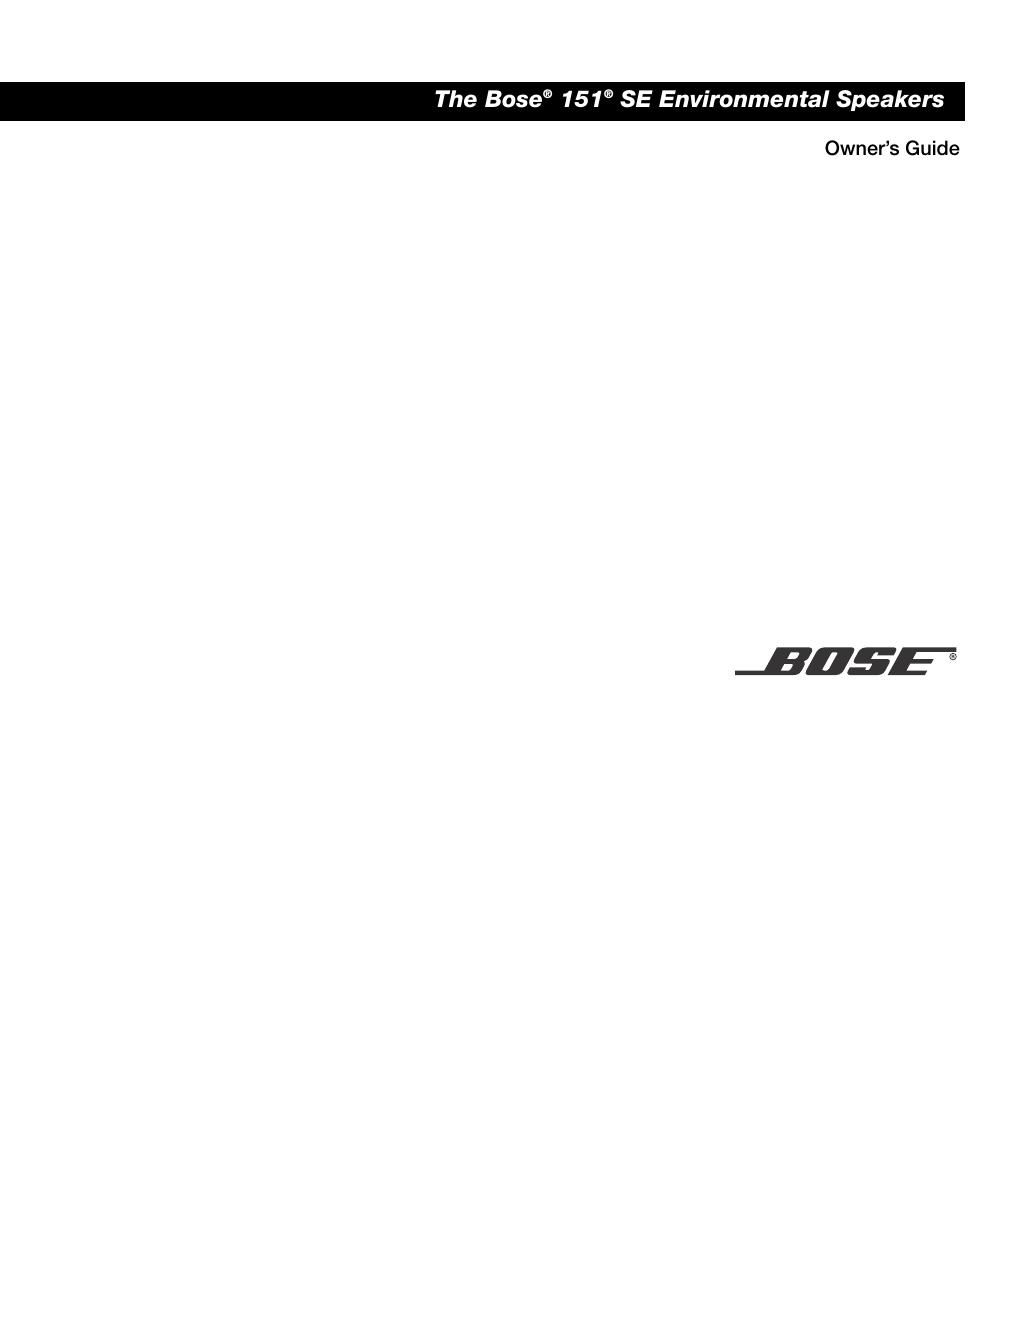 bose 151 se owners guide